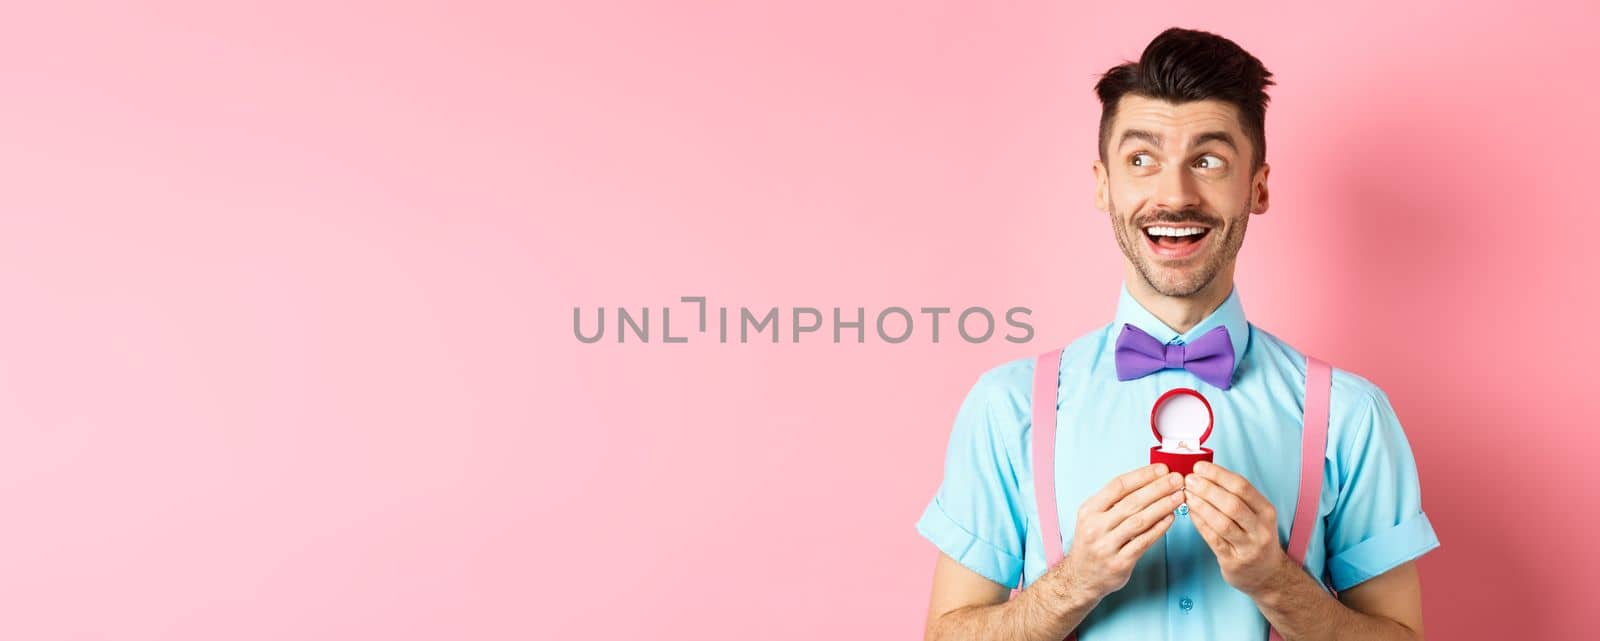 Valentines day. Romantic handsome man looking dreamy and smiling, showing engagement ring for his lover, standing happy over pink background.